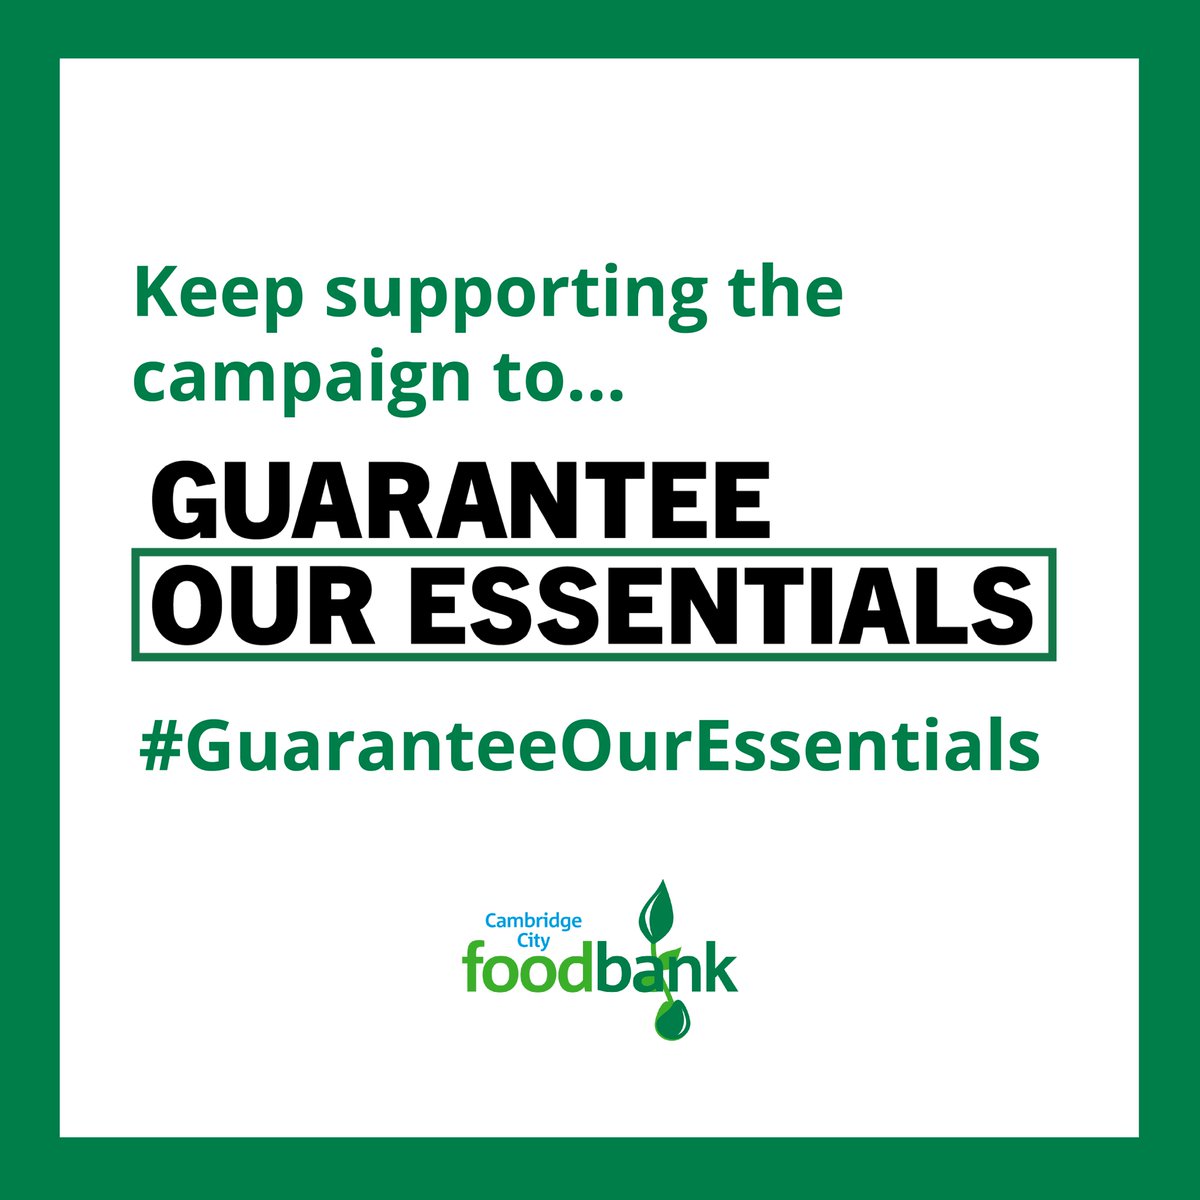 Over the last 12 months, the need for our support has grown by 15%.

We need to ensure that the level of social security payments allows people to afford the basics. This is why we’re backing the #GuaranteeOurEssentials campaign.

Learn about the campaign: trusselltrust.org/get-involved/c…